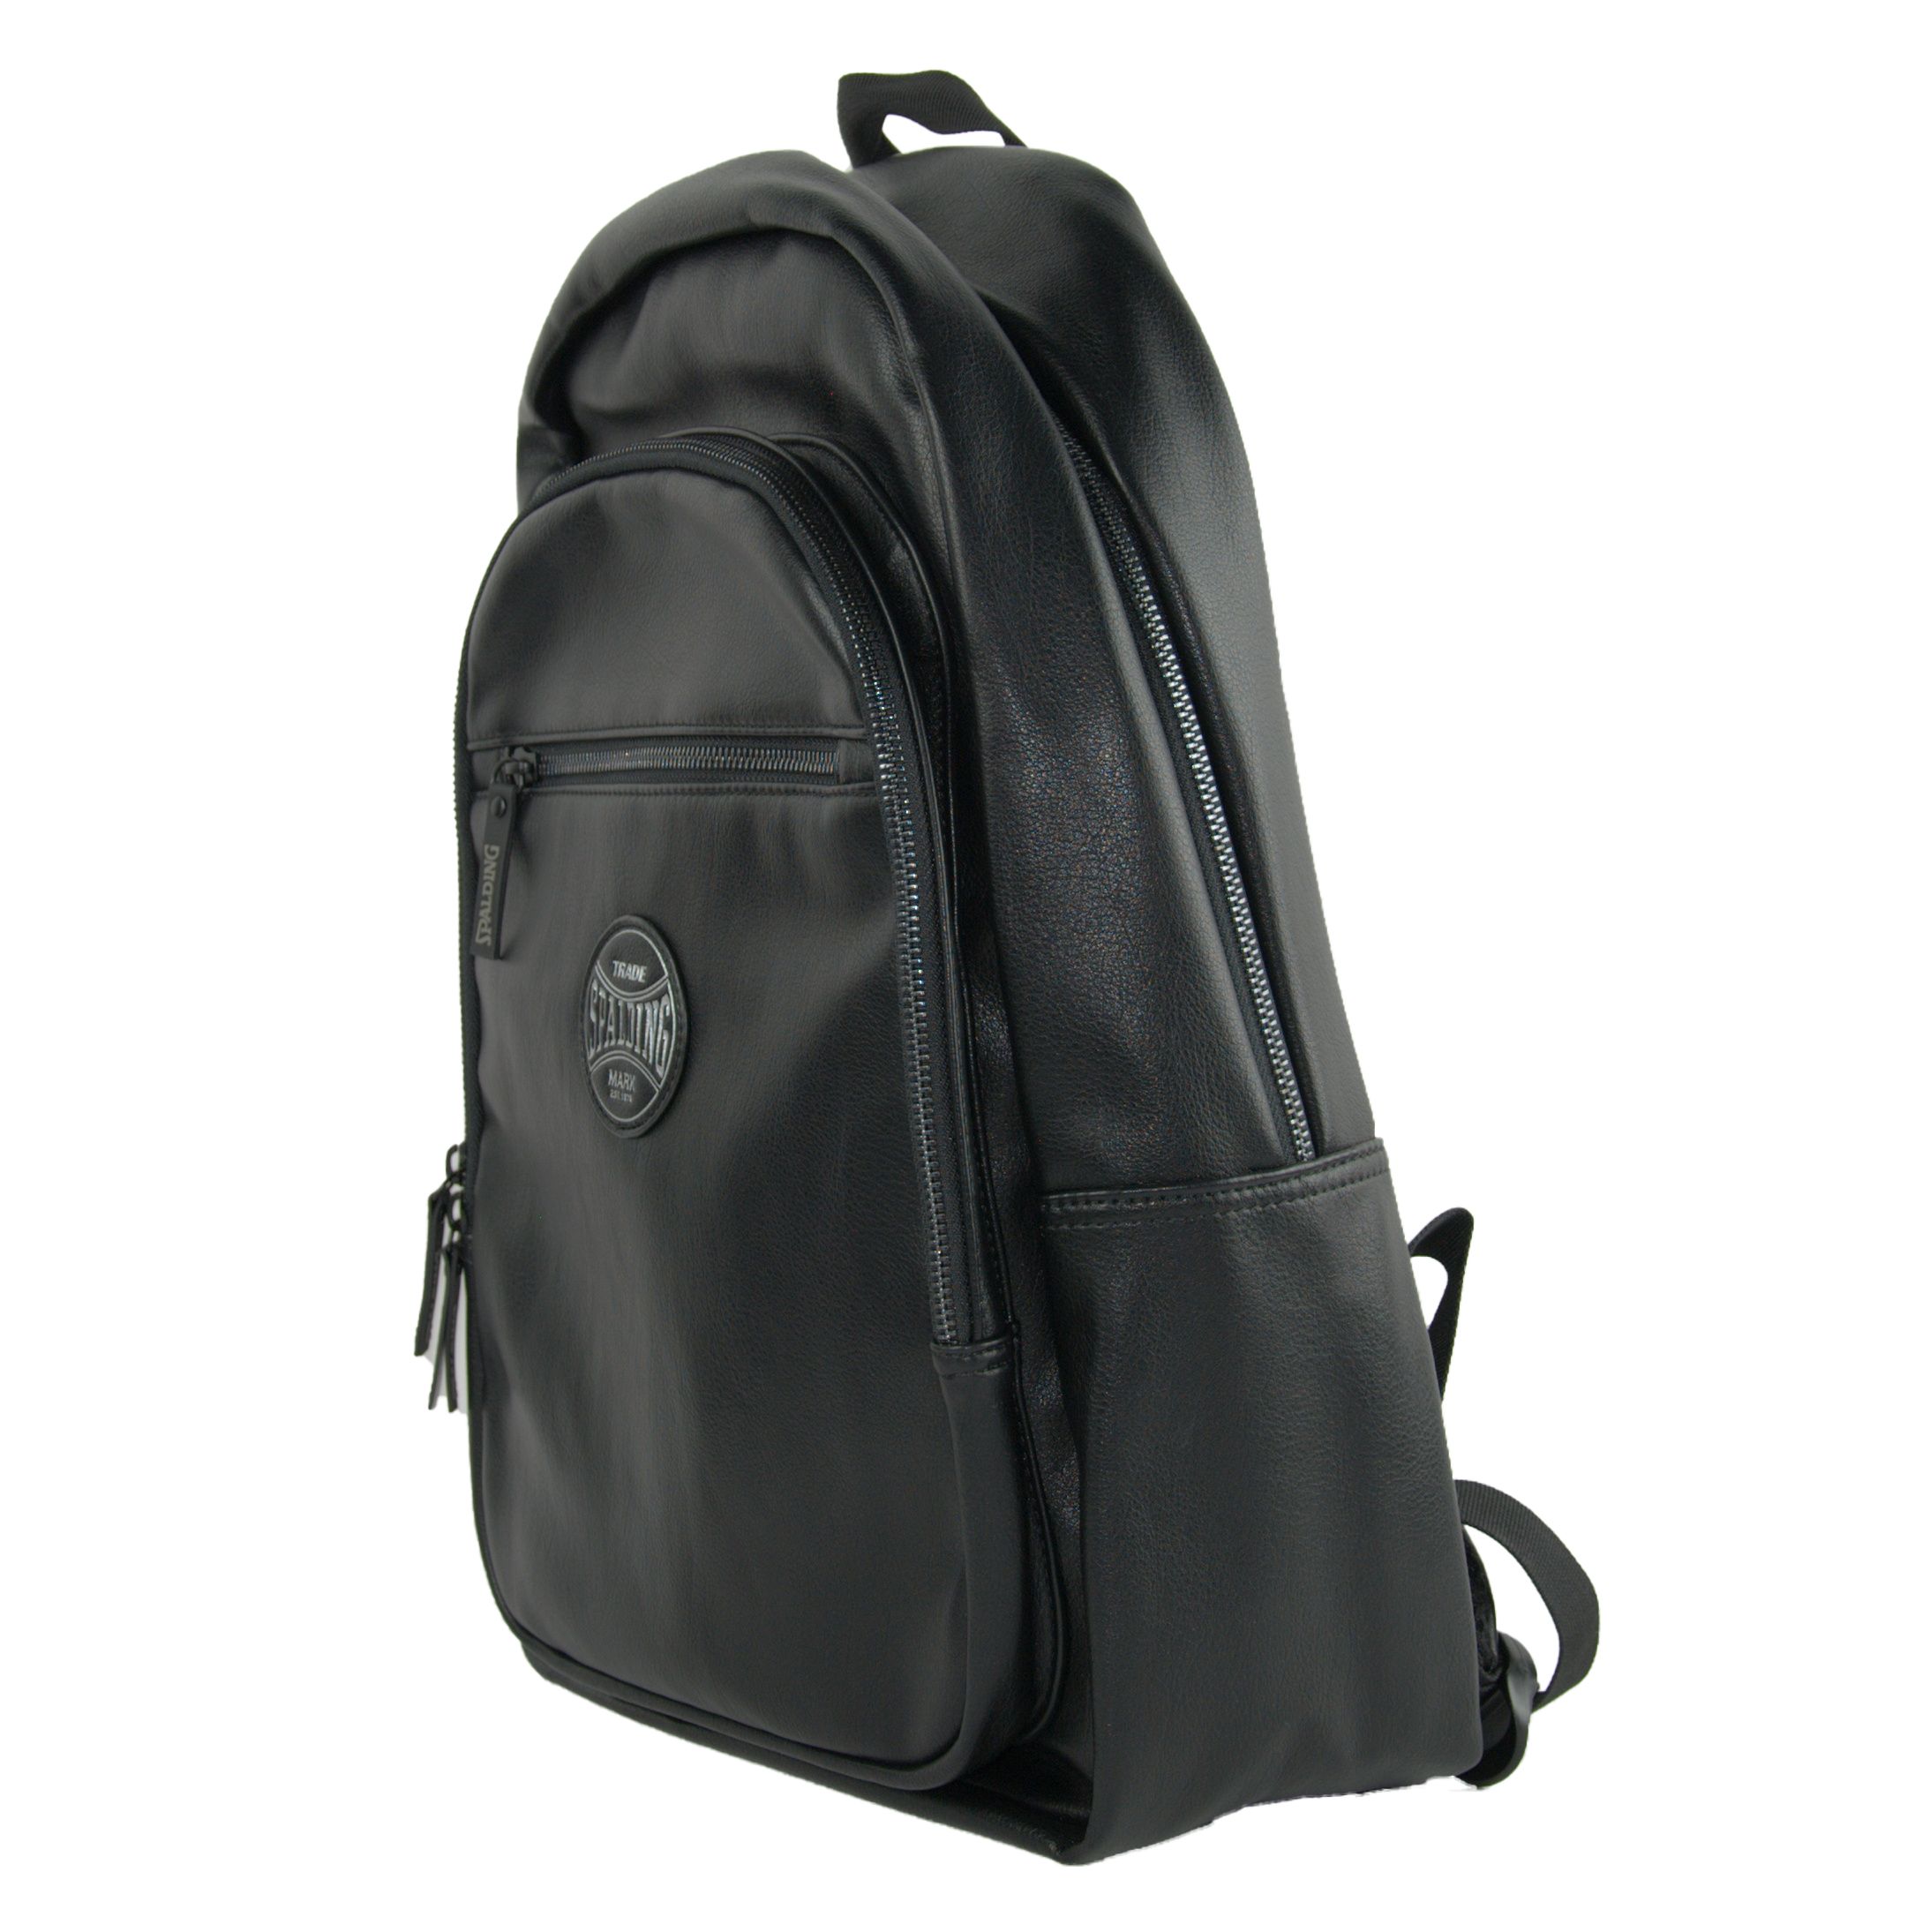 Elite Black Pro Backpack Play Off Edition